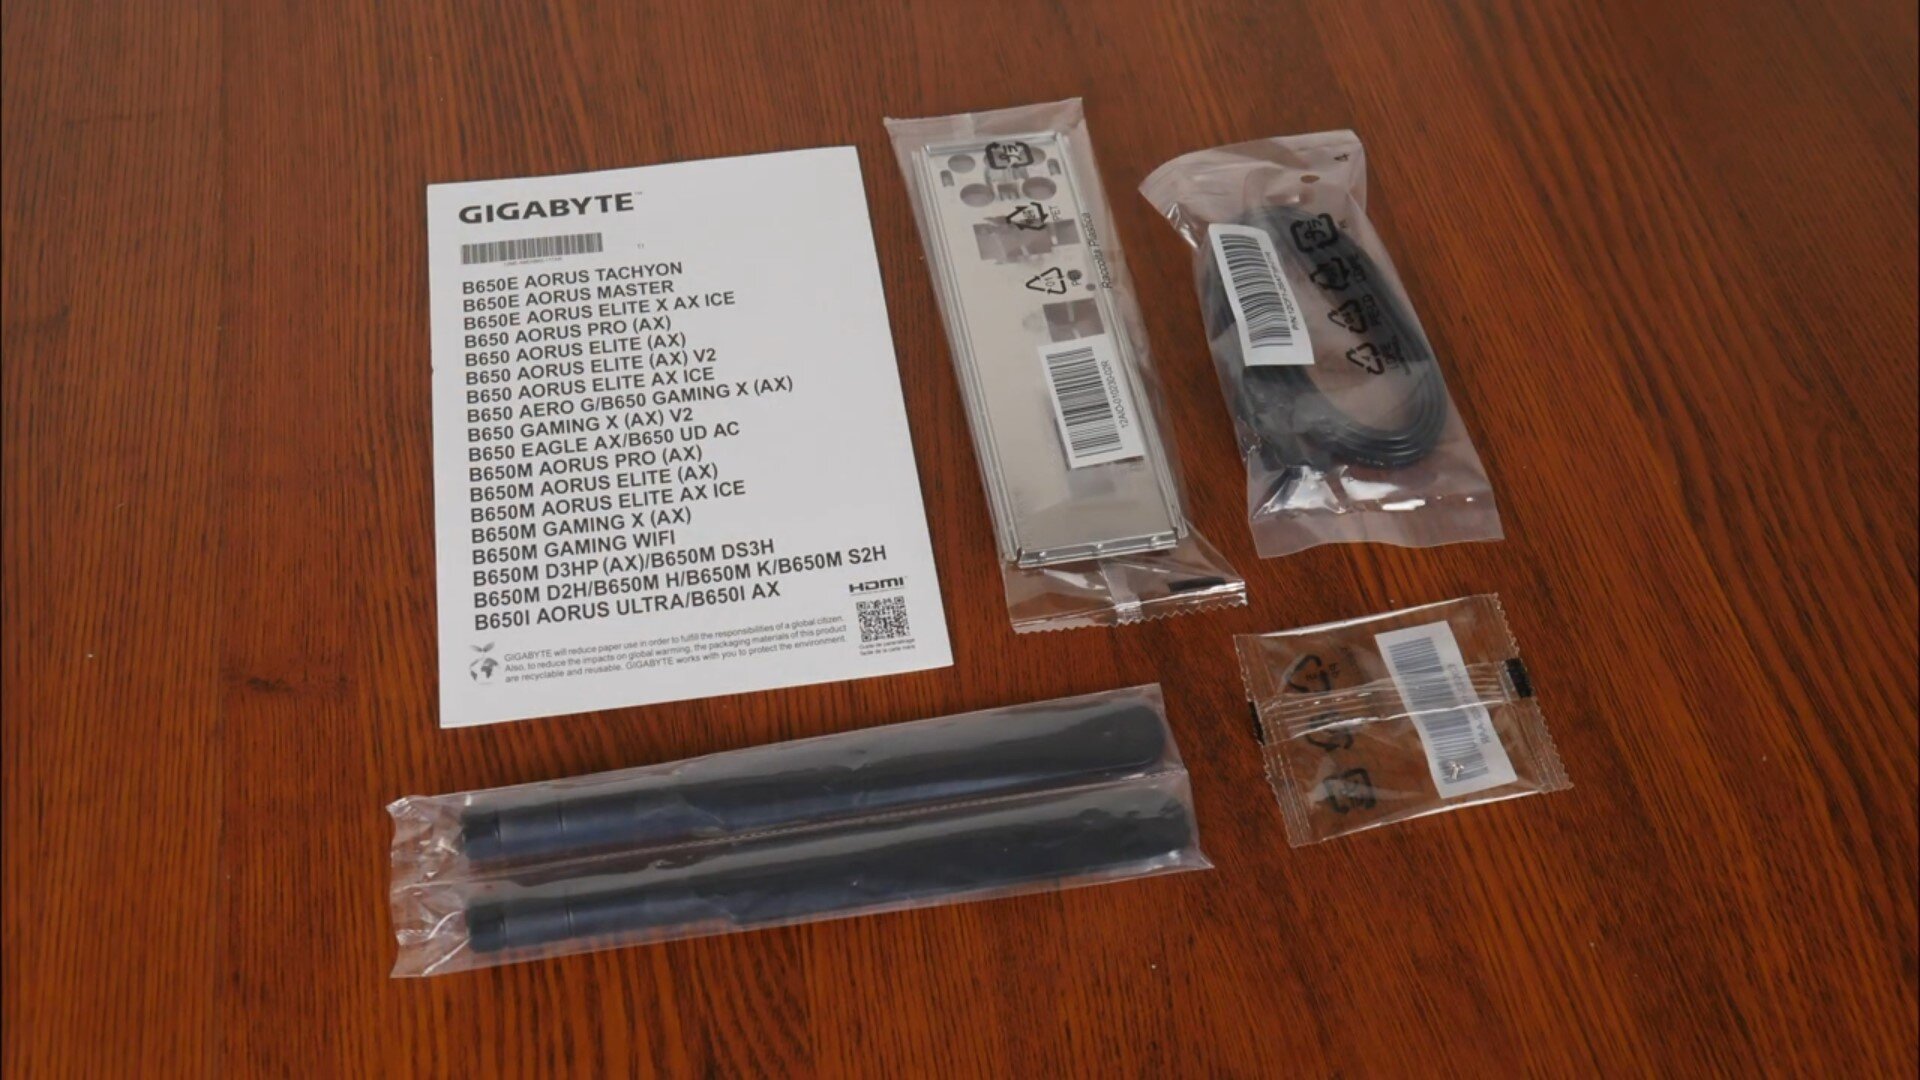 Gigabyte B650I AX Packaging (Contents)